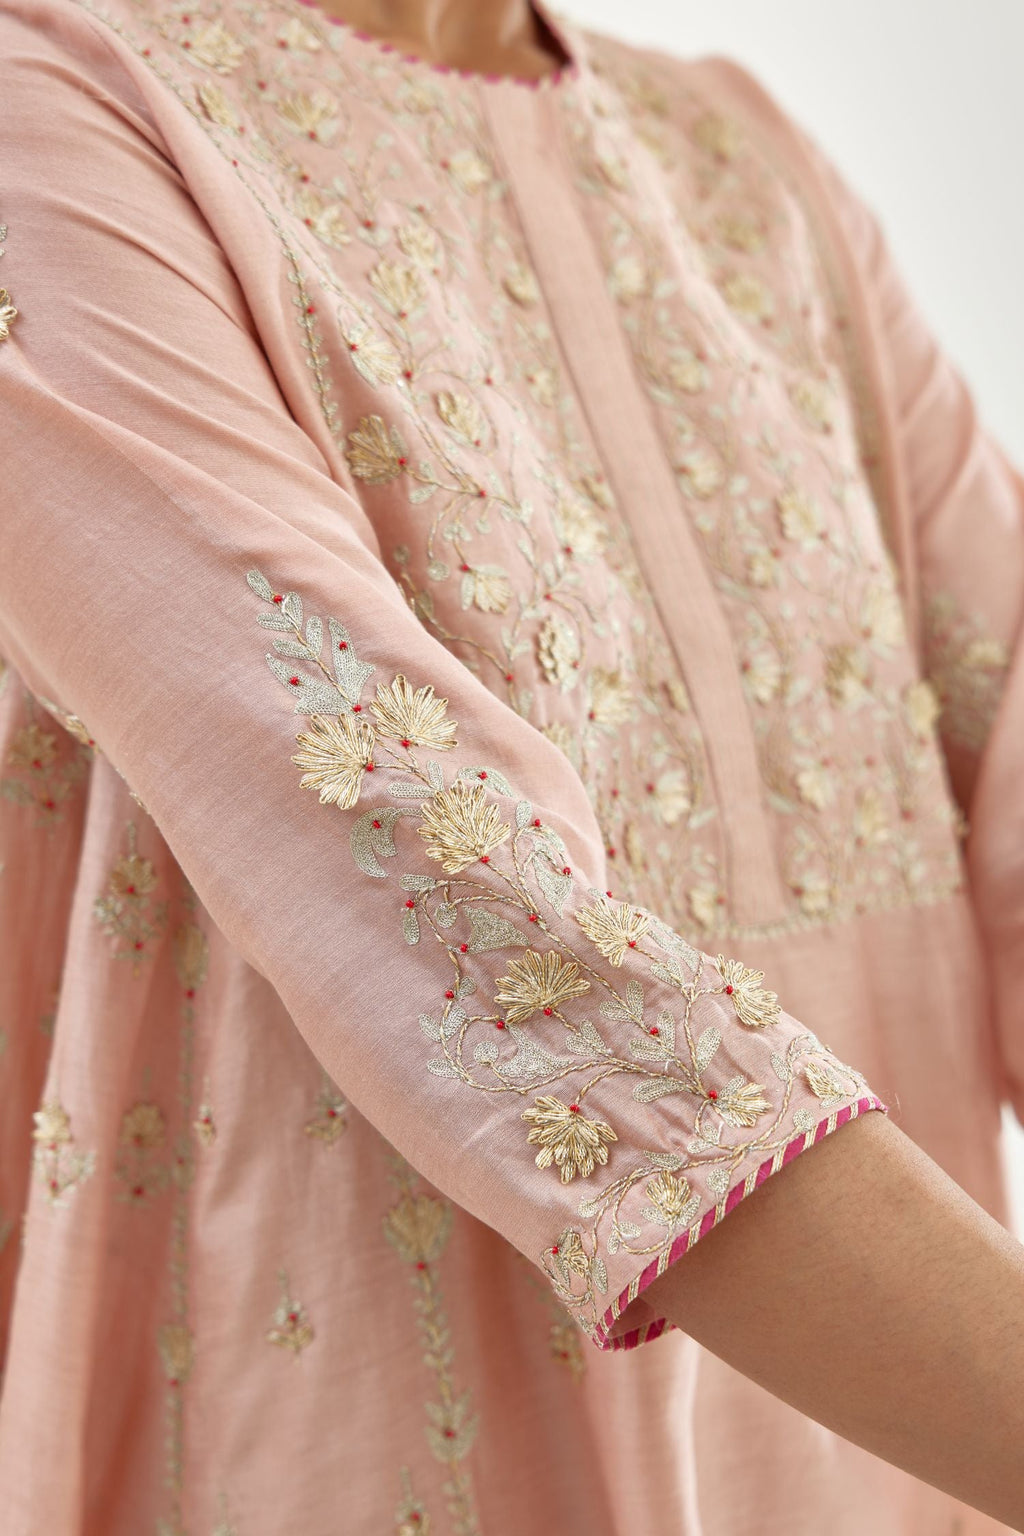 Pink A-line long kurta with all-over zari, dori, sequins and gota embroidery.